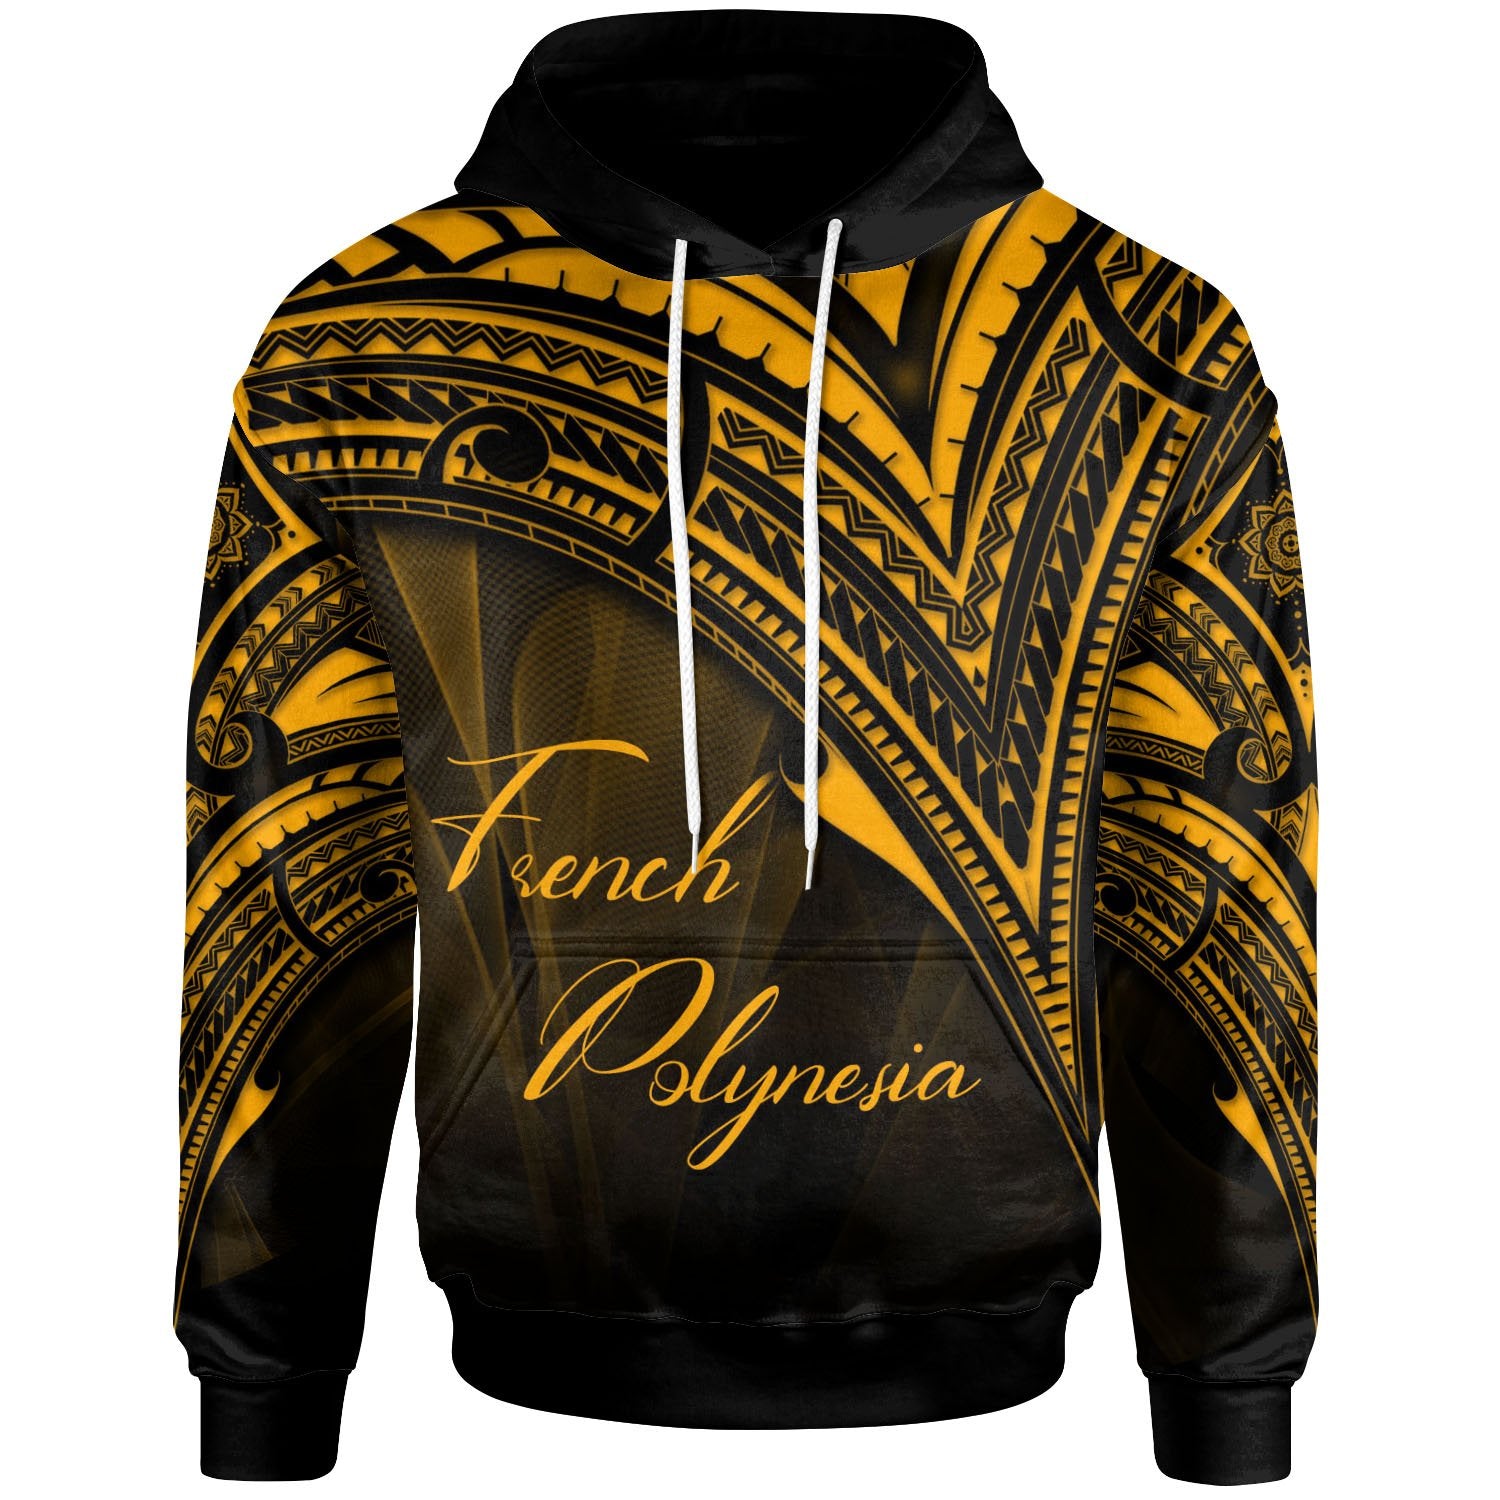 French Polynesia Hoodie Gold Color Cross Style Unisex Black - Polynesian Pride